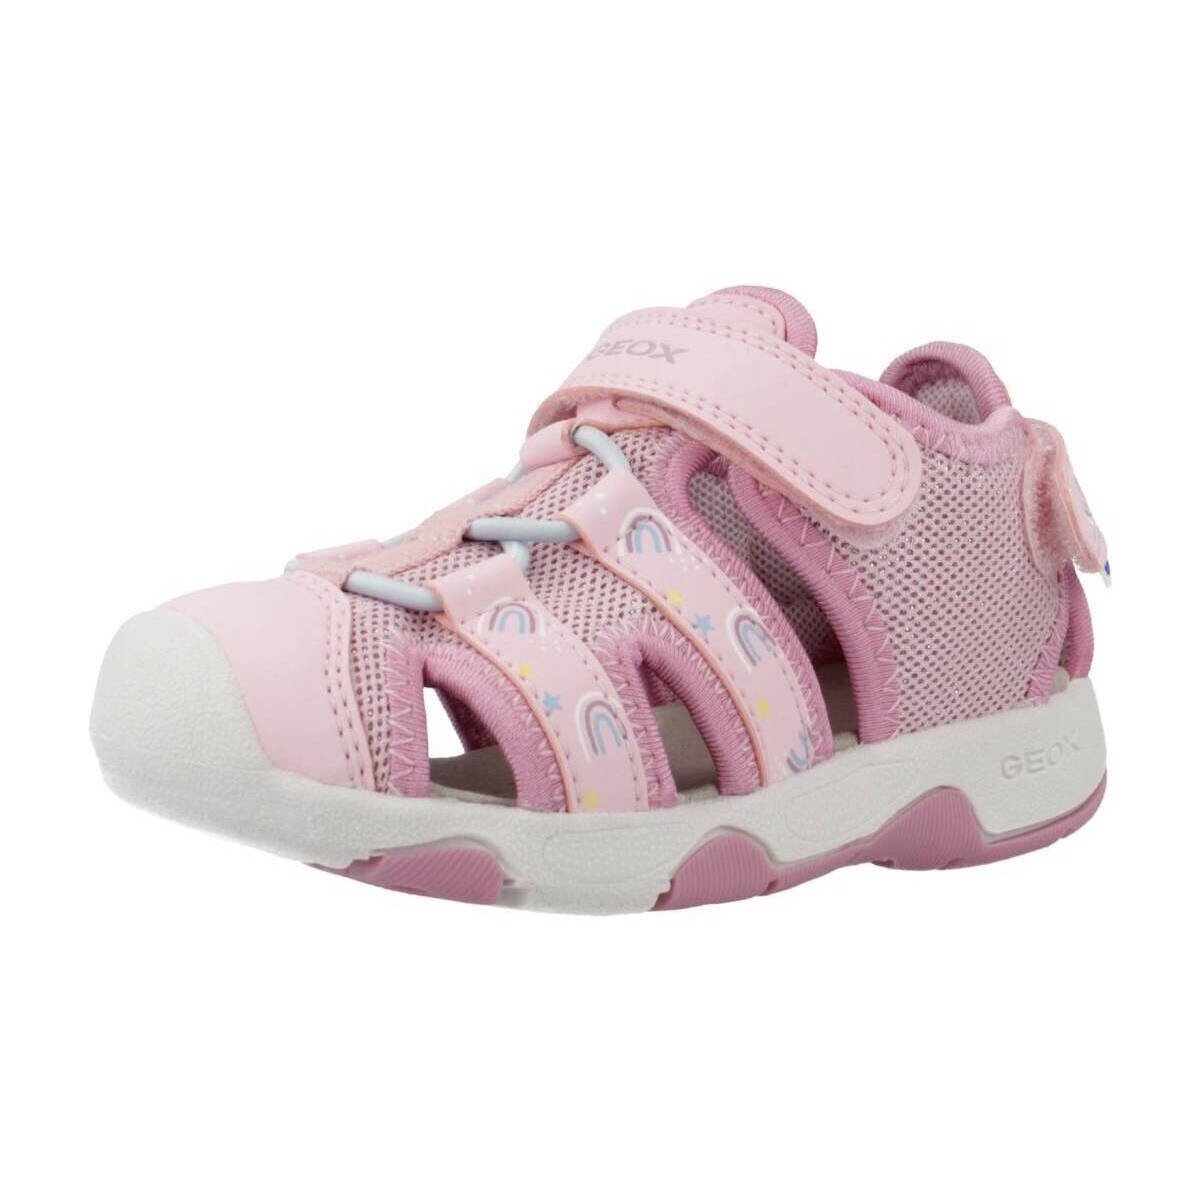 Chaussures Fille Sandales et Nu-pieds Geox S. MULTY G Rose